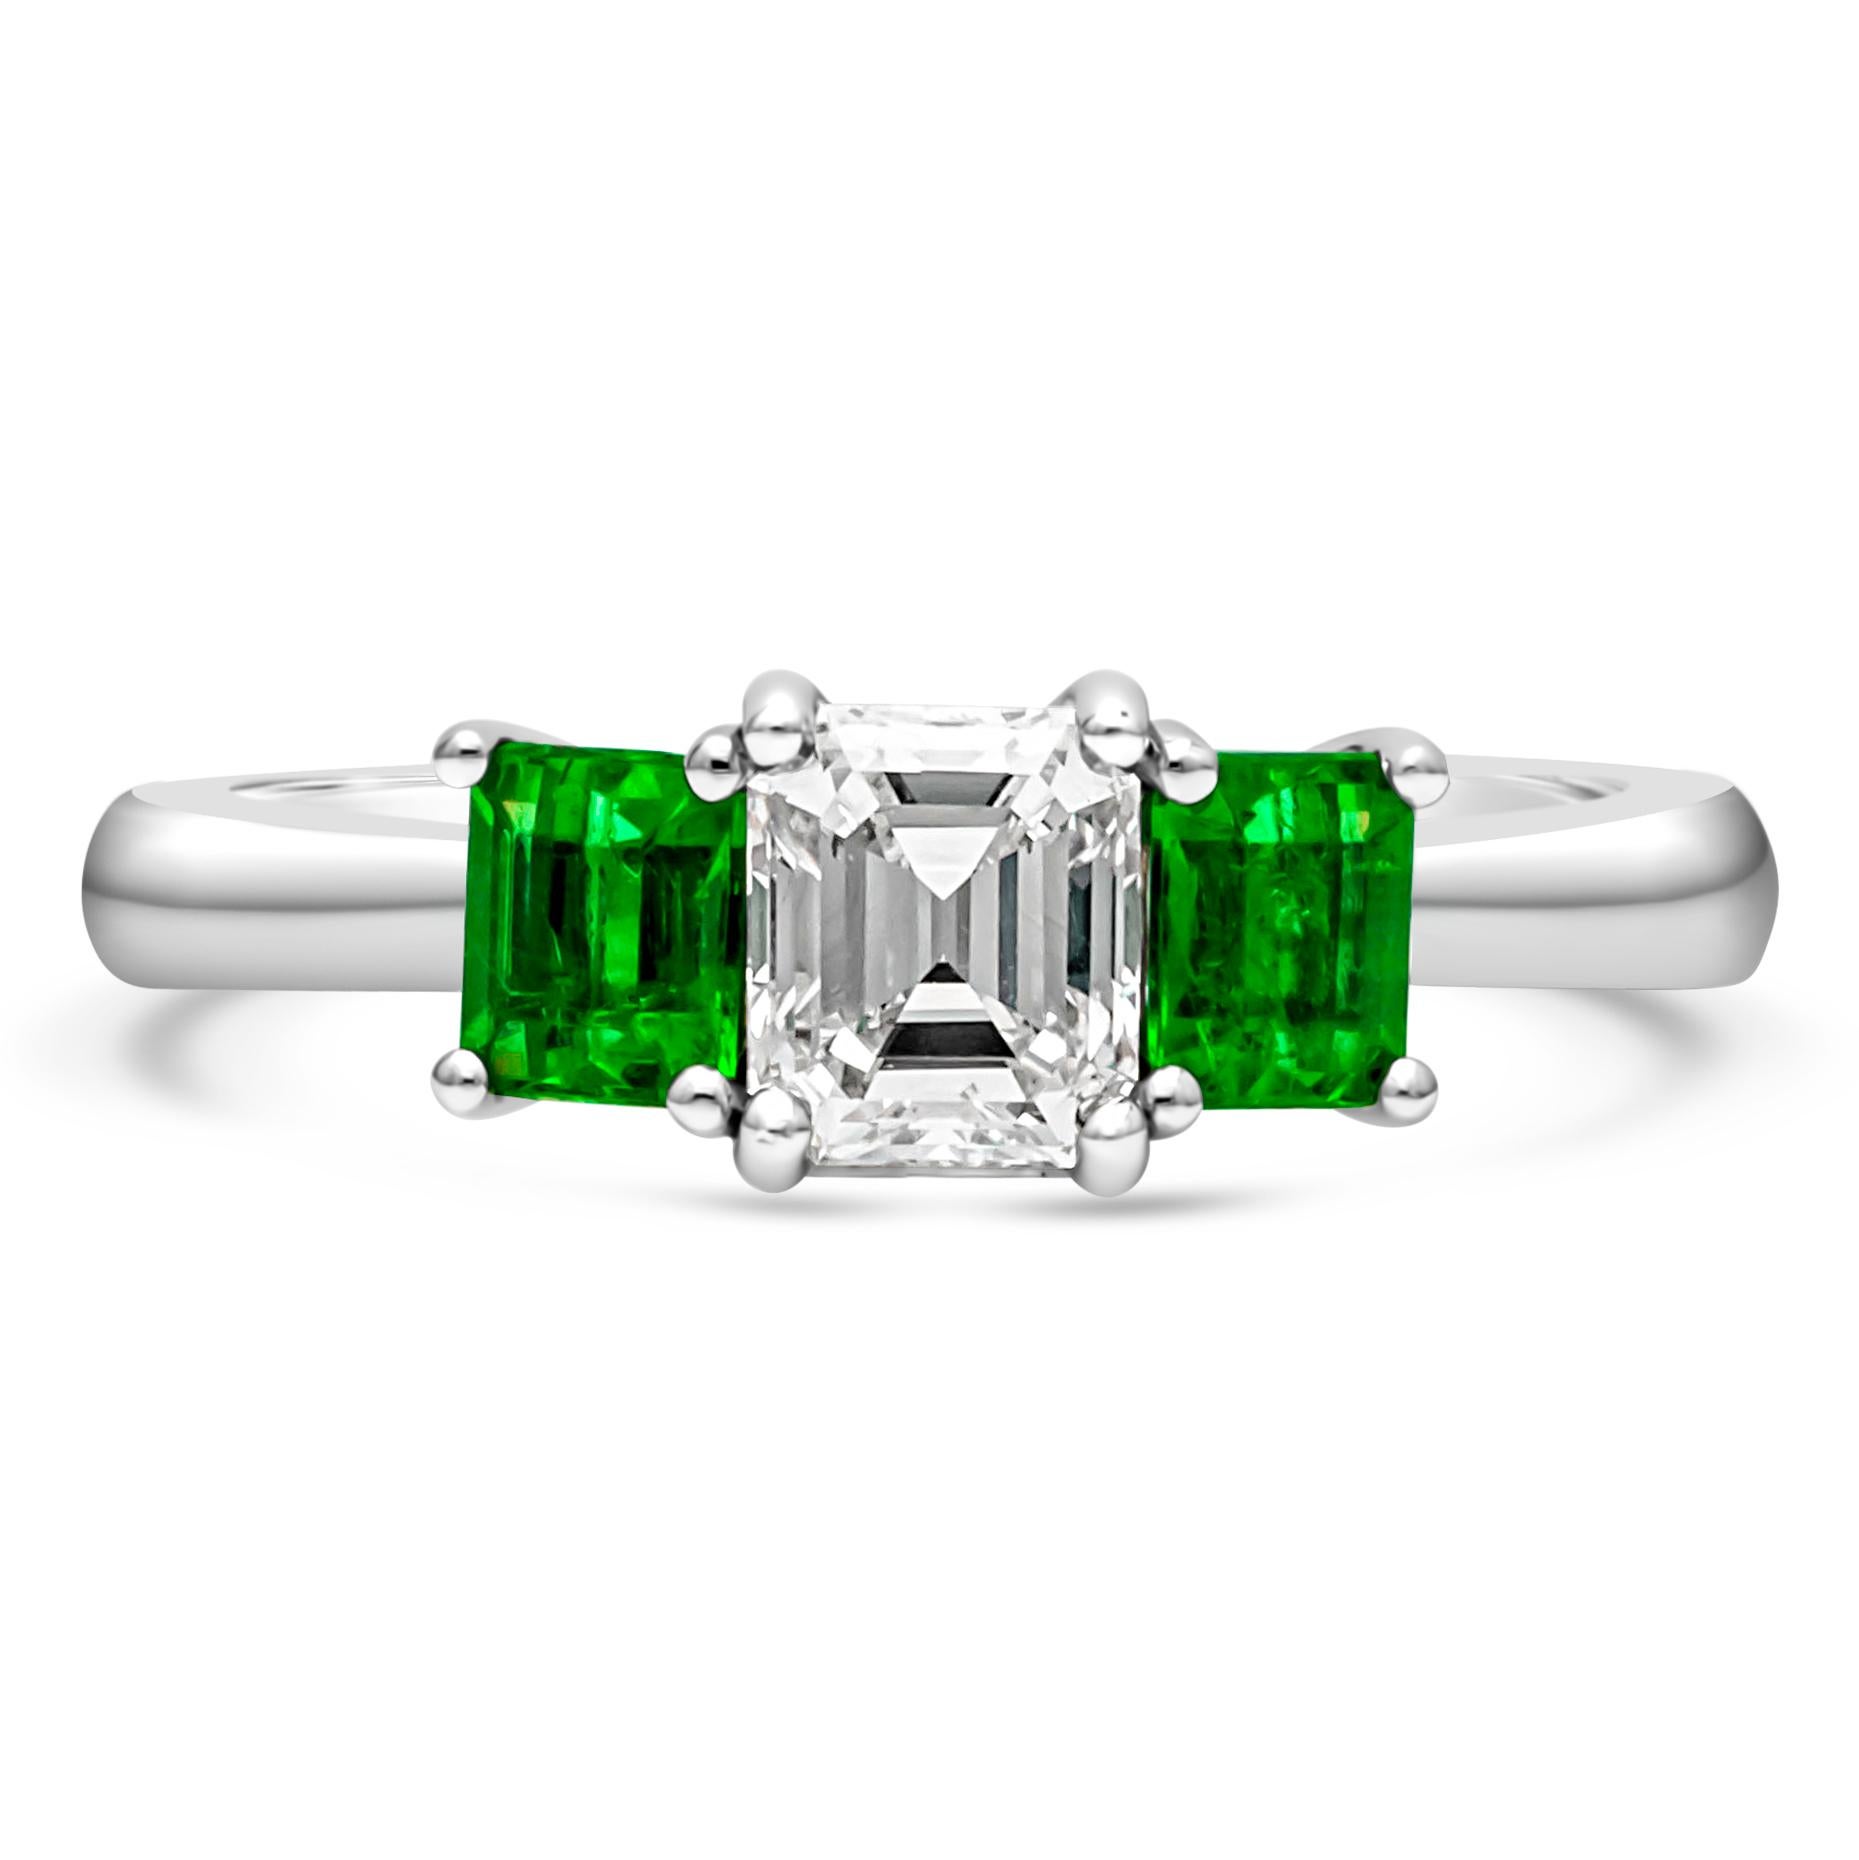 A simple three stone engagement ring style showcasing a GIA Certified 0.71 carat emerald cut diamond center stone, F color and VS2 in clarity. Flanked on each side by emerald cut green emerald weighing 0.60 carats total. Each set in a four prong